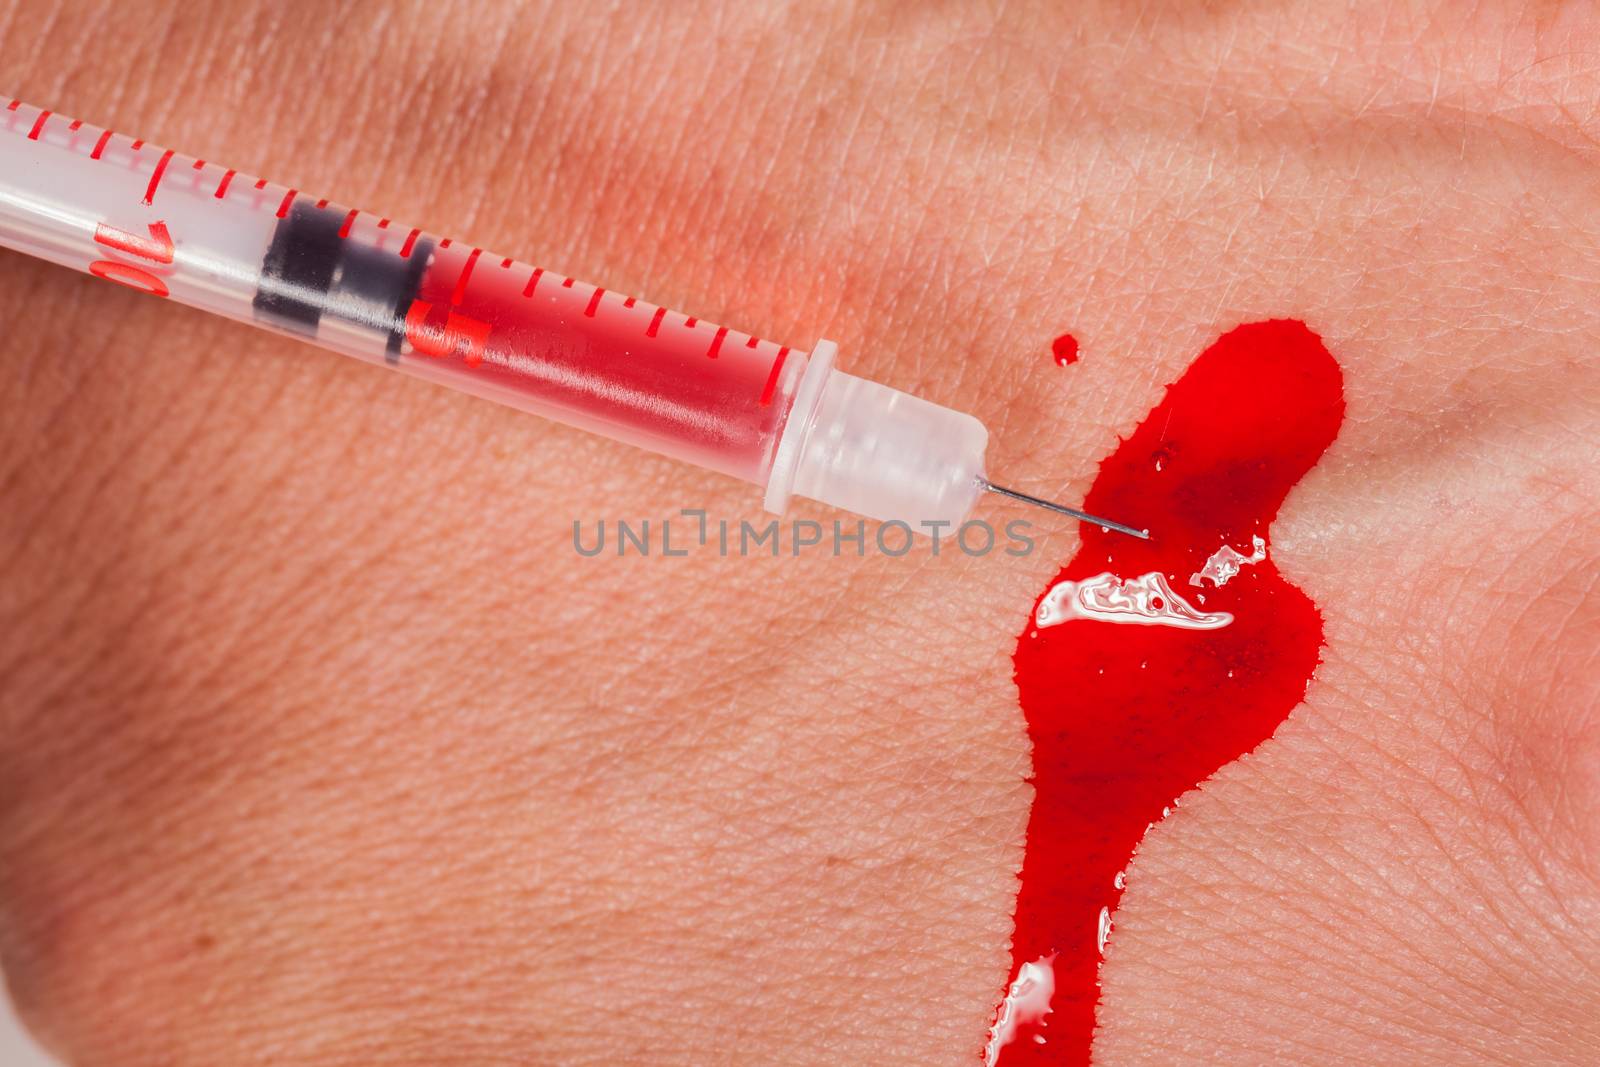 Subcutaneous medical injection concept by juniart